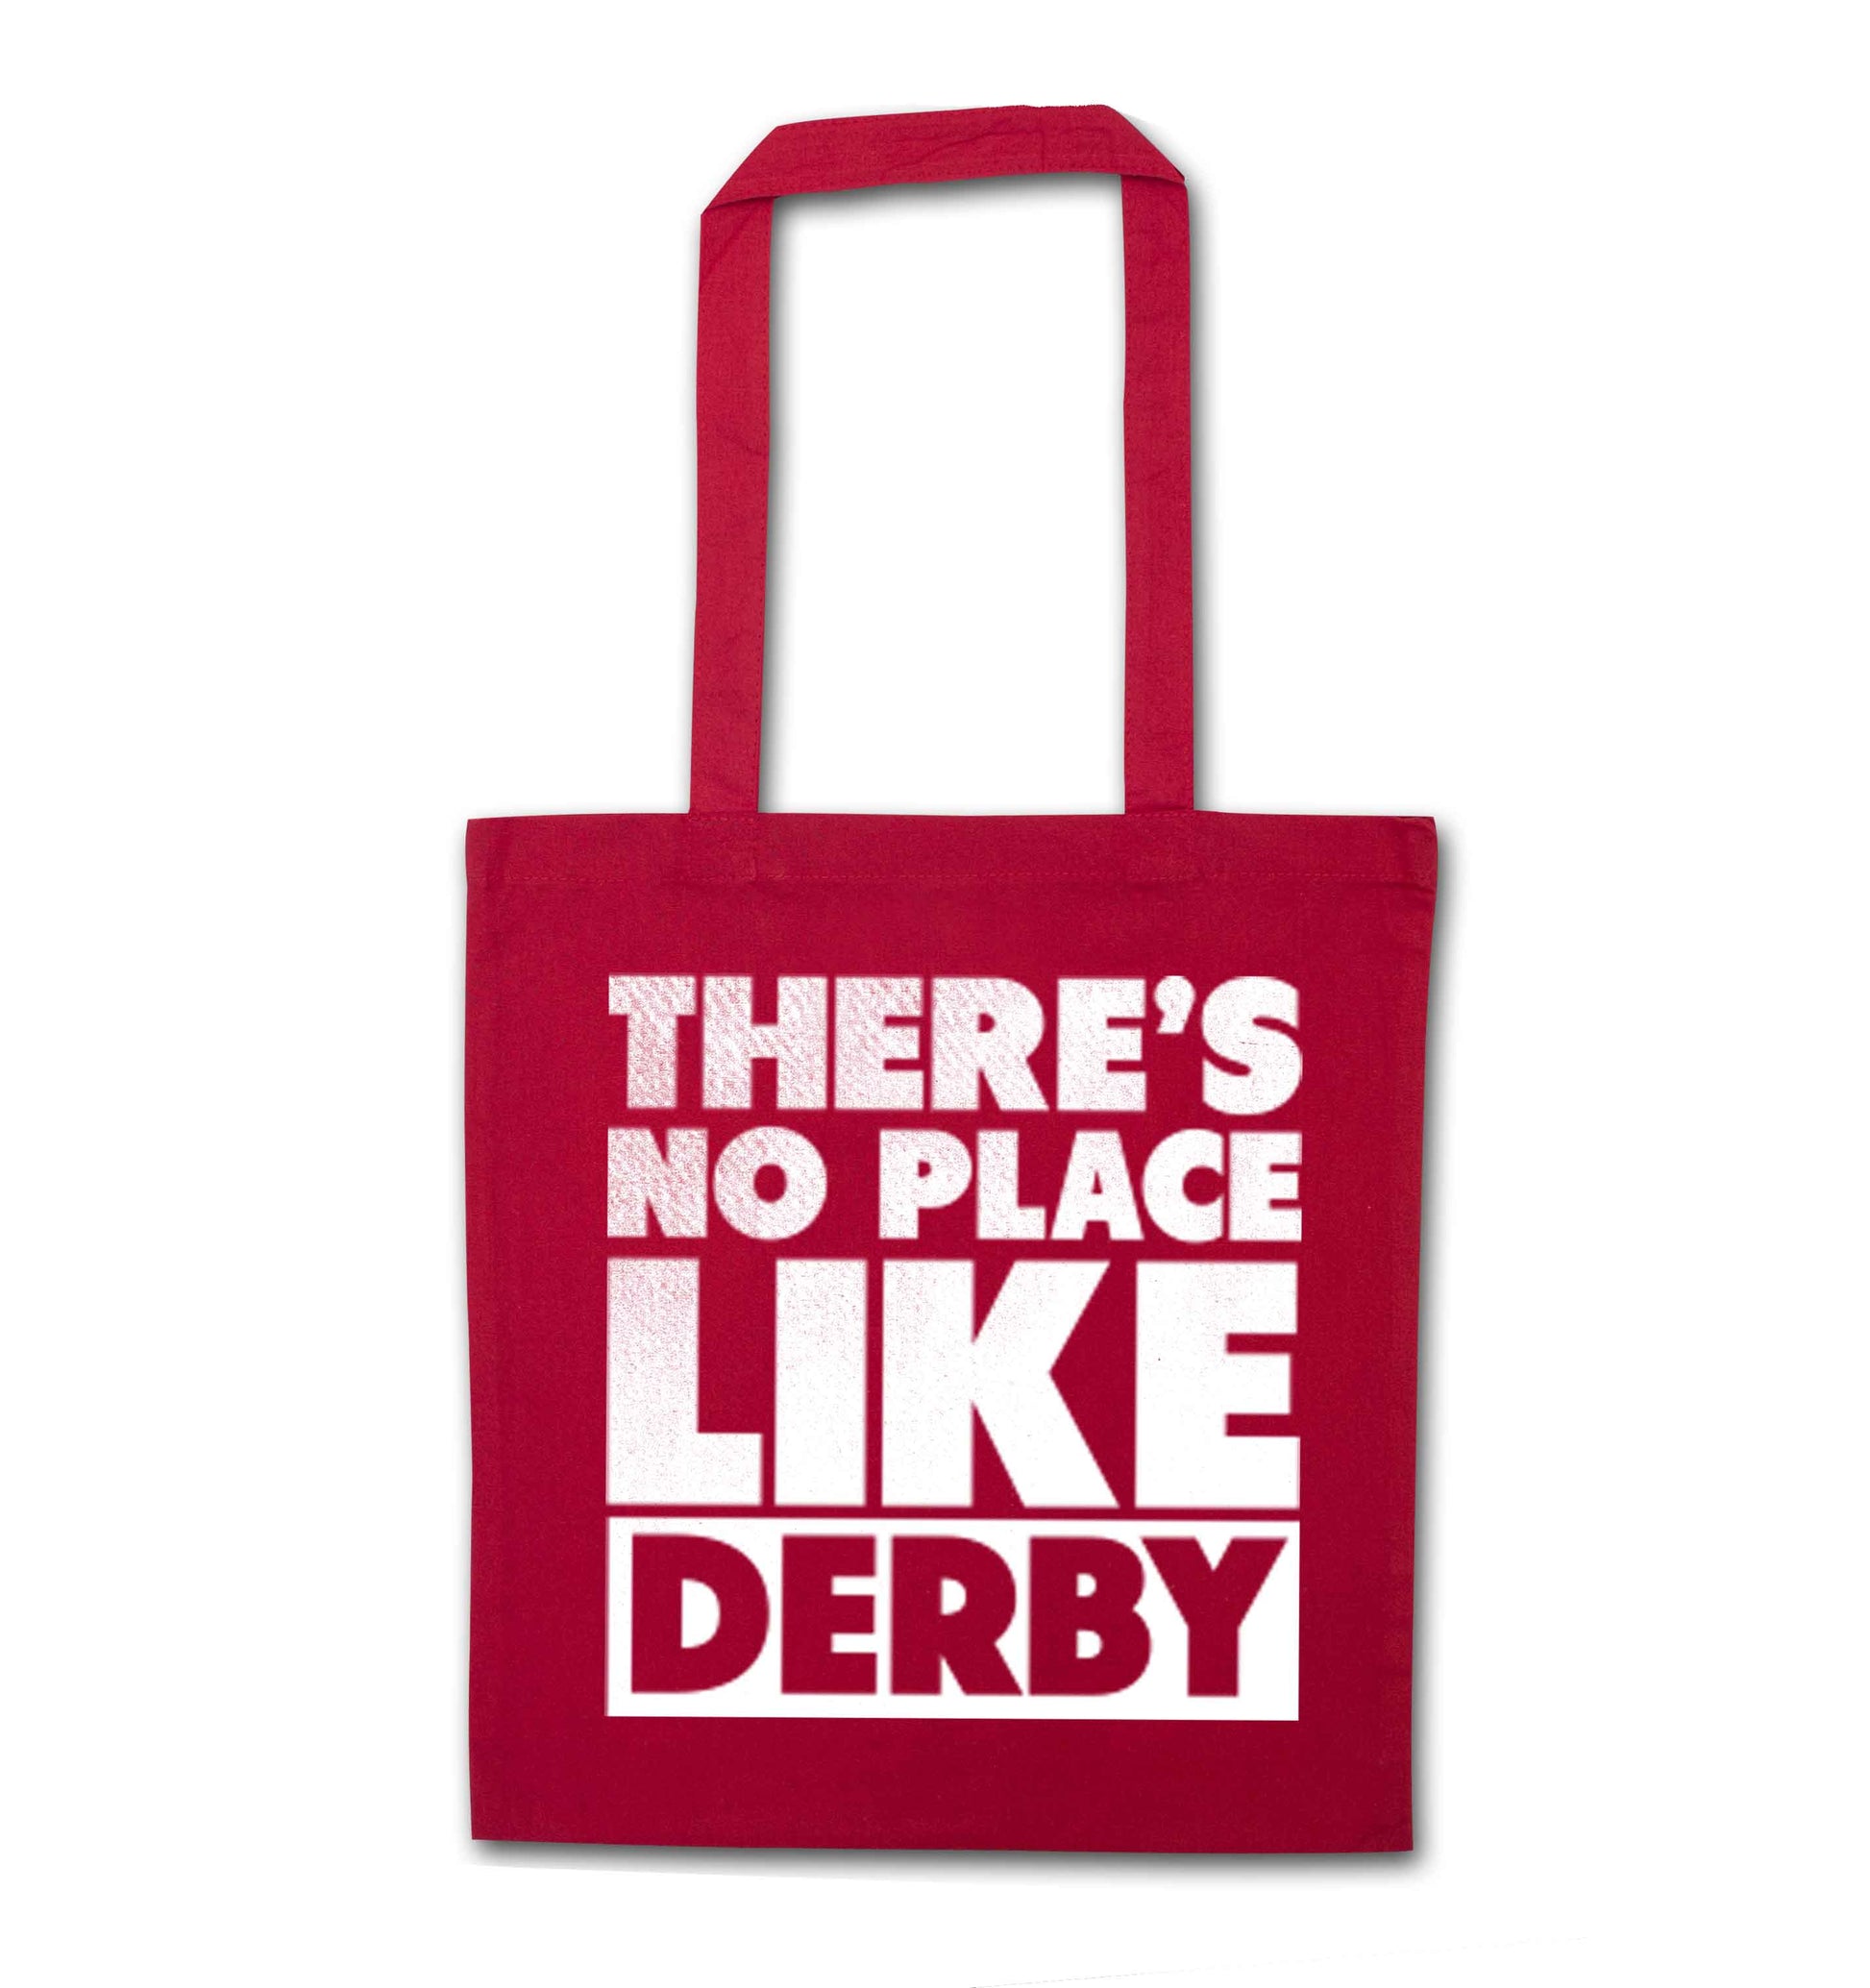 There's no place like Derby red tote bag